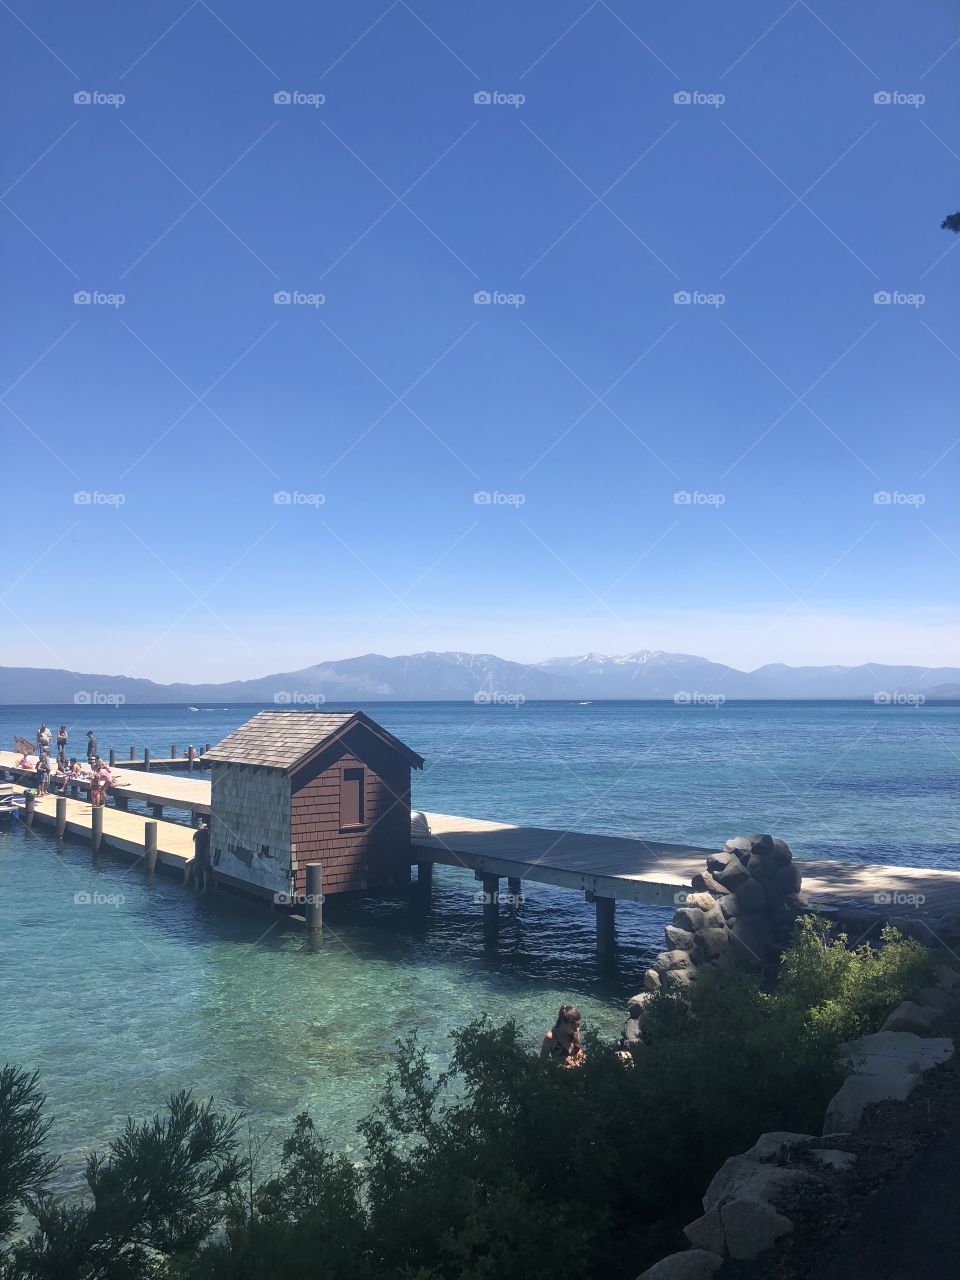 Taken while camping in Lake Tahoe, California. Beautiful clear waters and mountains in view :)